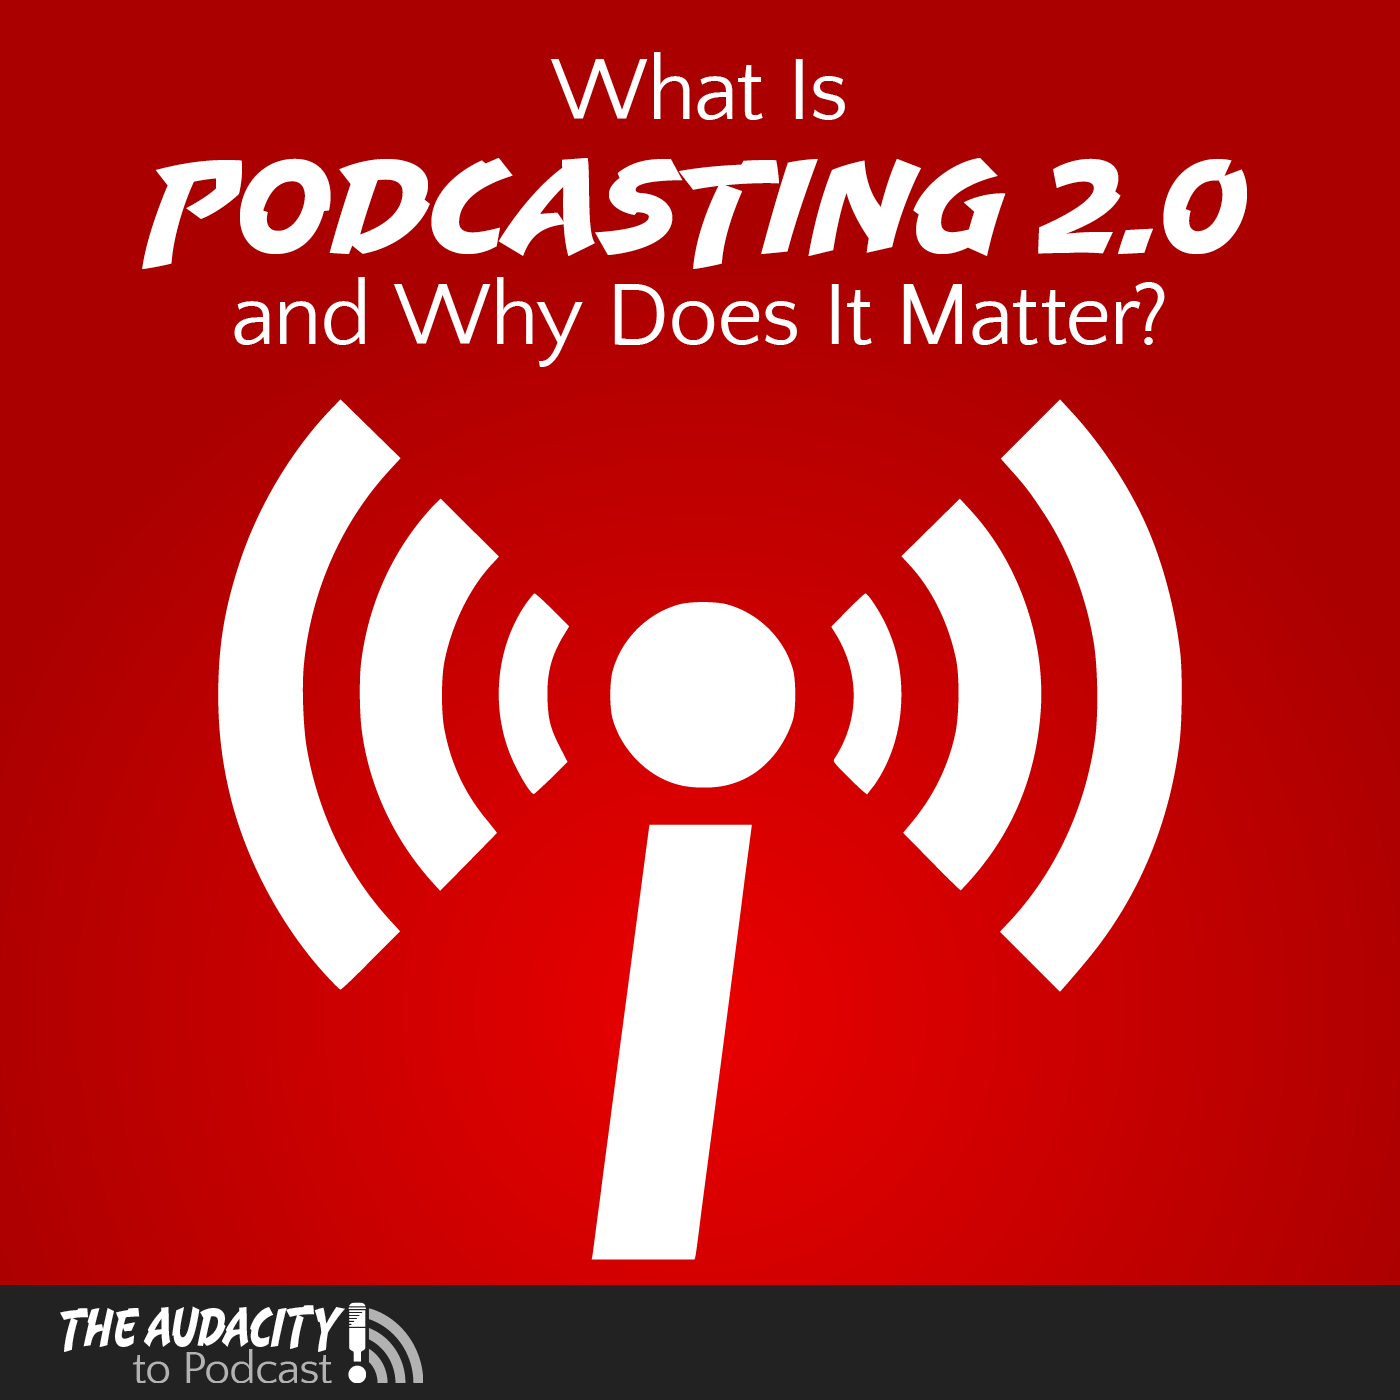 What Is Podcasting 2.0 and Why Does It Matter?